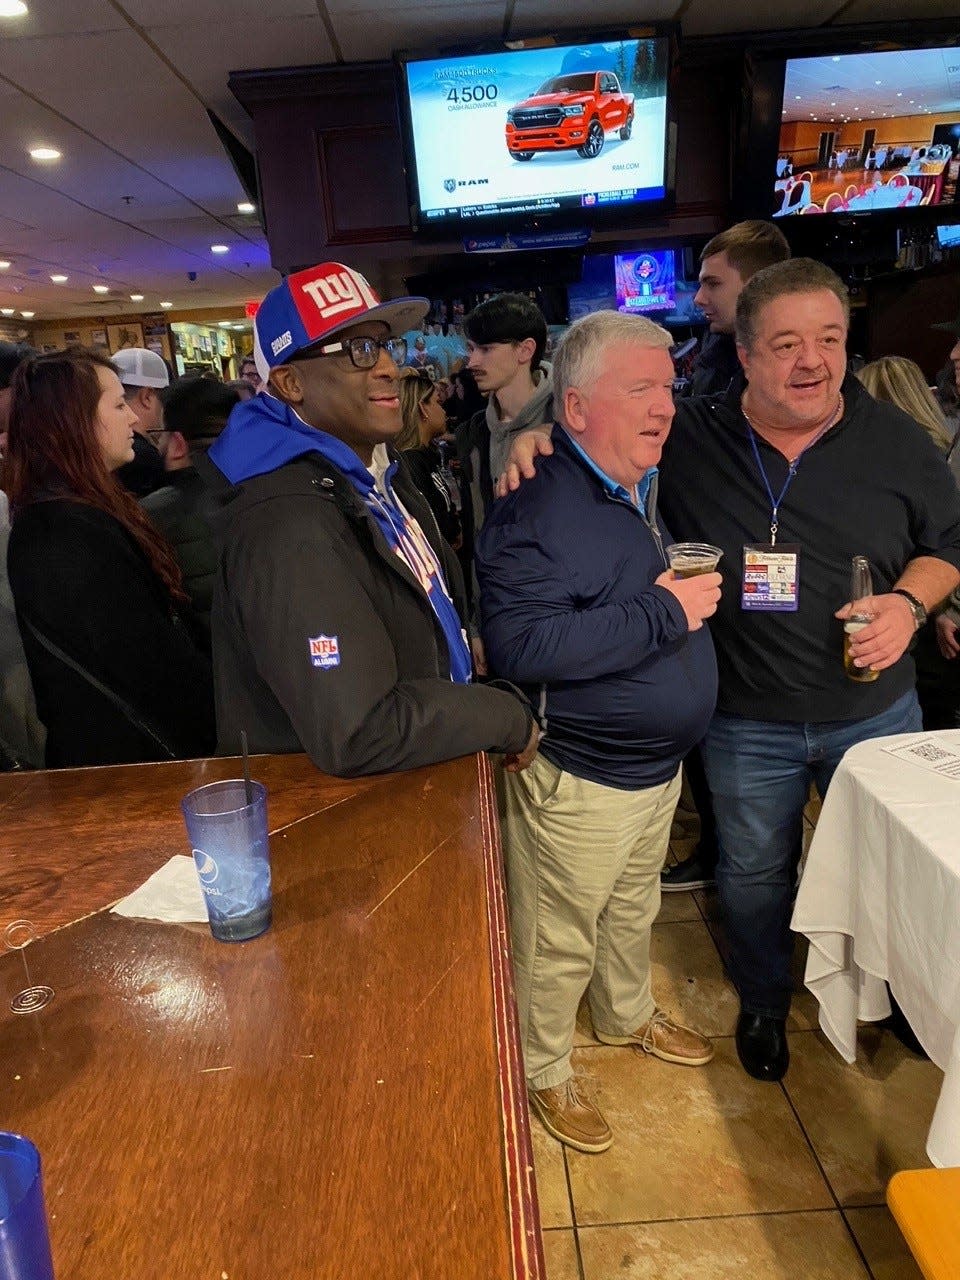 Stephen Baker (left), former New York Giants receiver and member of the team that won Super Bowl XXV in 1991, served as a celebrity judge for the final round of Pizza Bowl IV.